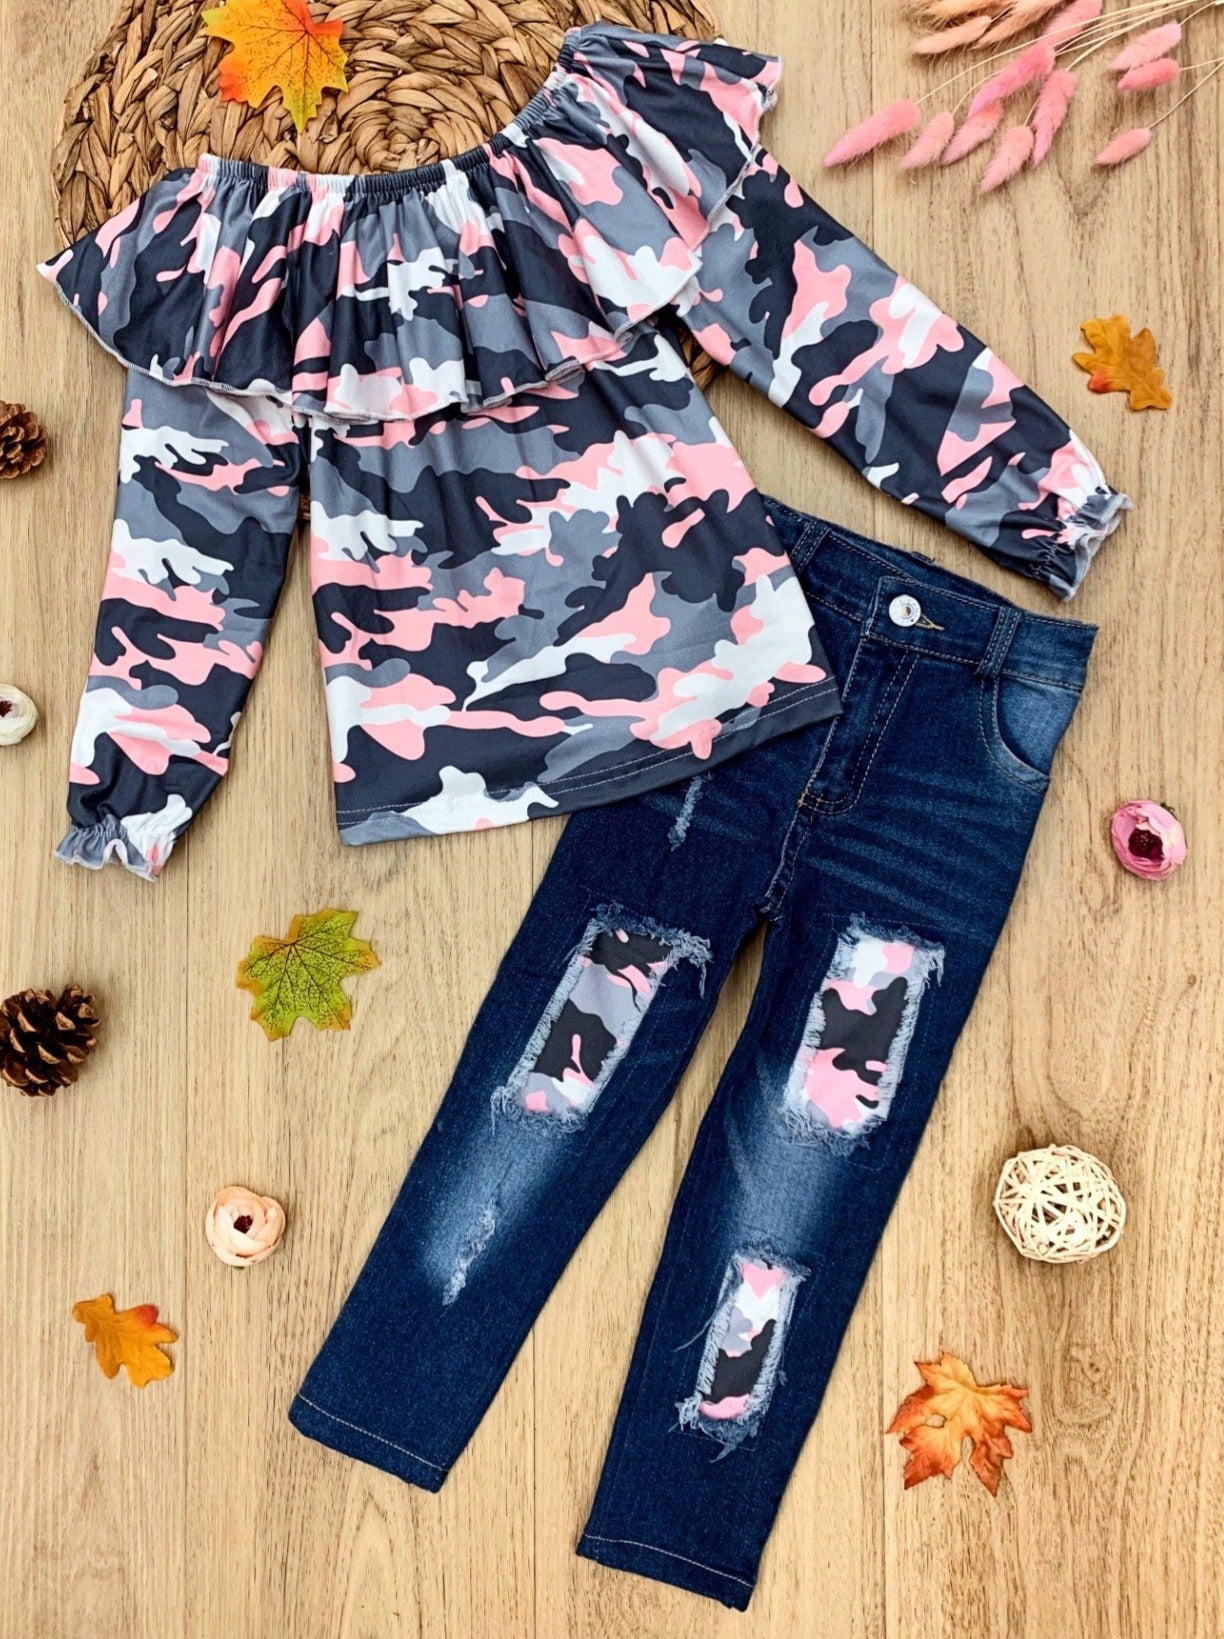 Fall Outfits | Camo Ruffle Bib Top & Patched Jeans Set | Boutique Set